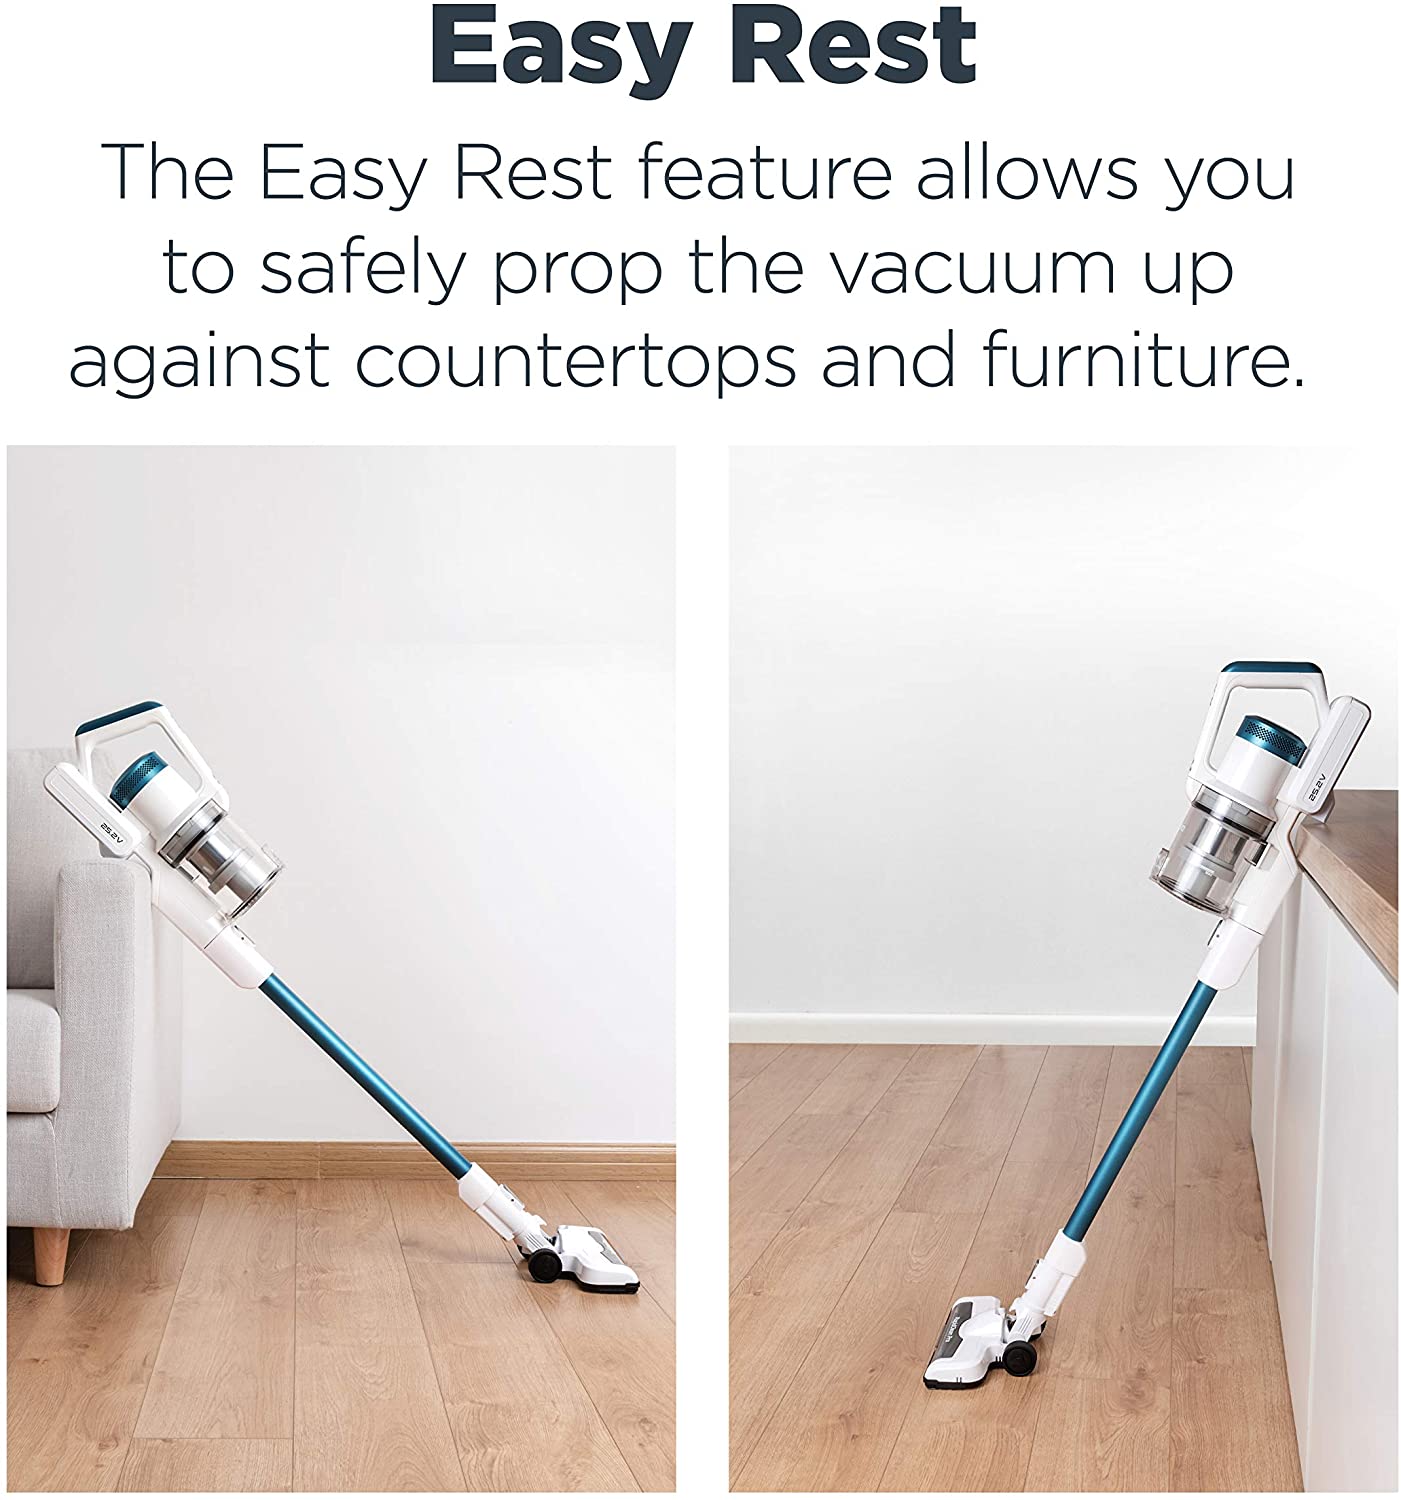 Eureka RapidClean Pro Lightweight Cordless Vacuum Cleaner, High Efficiency Powerful Digital Motor LED Headlights, Convenient Stick and Handheld Vac, Essential - image 3 of 4